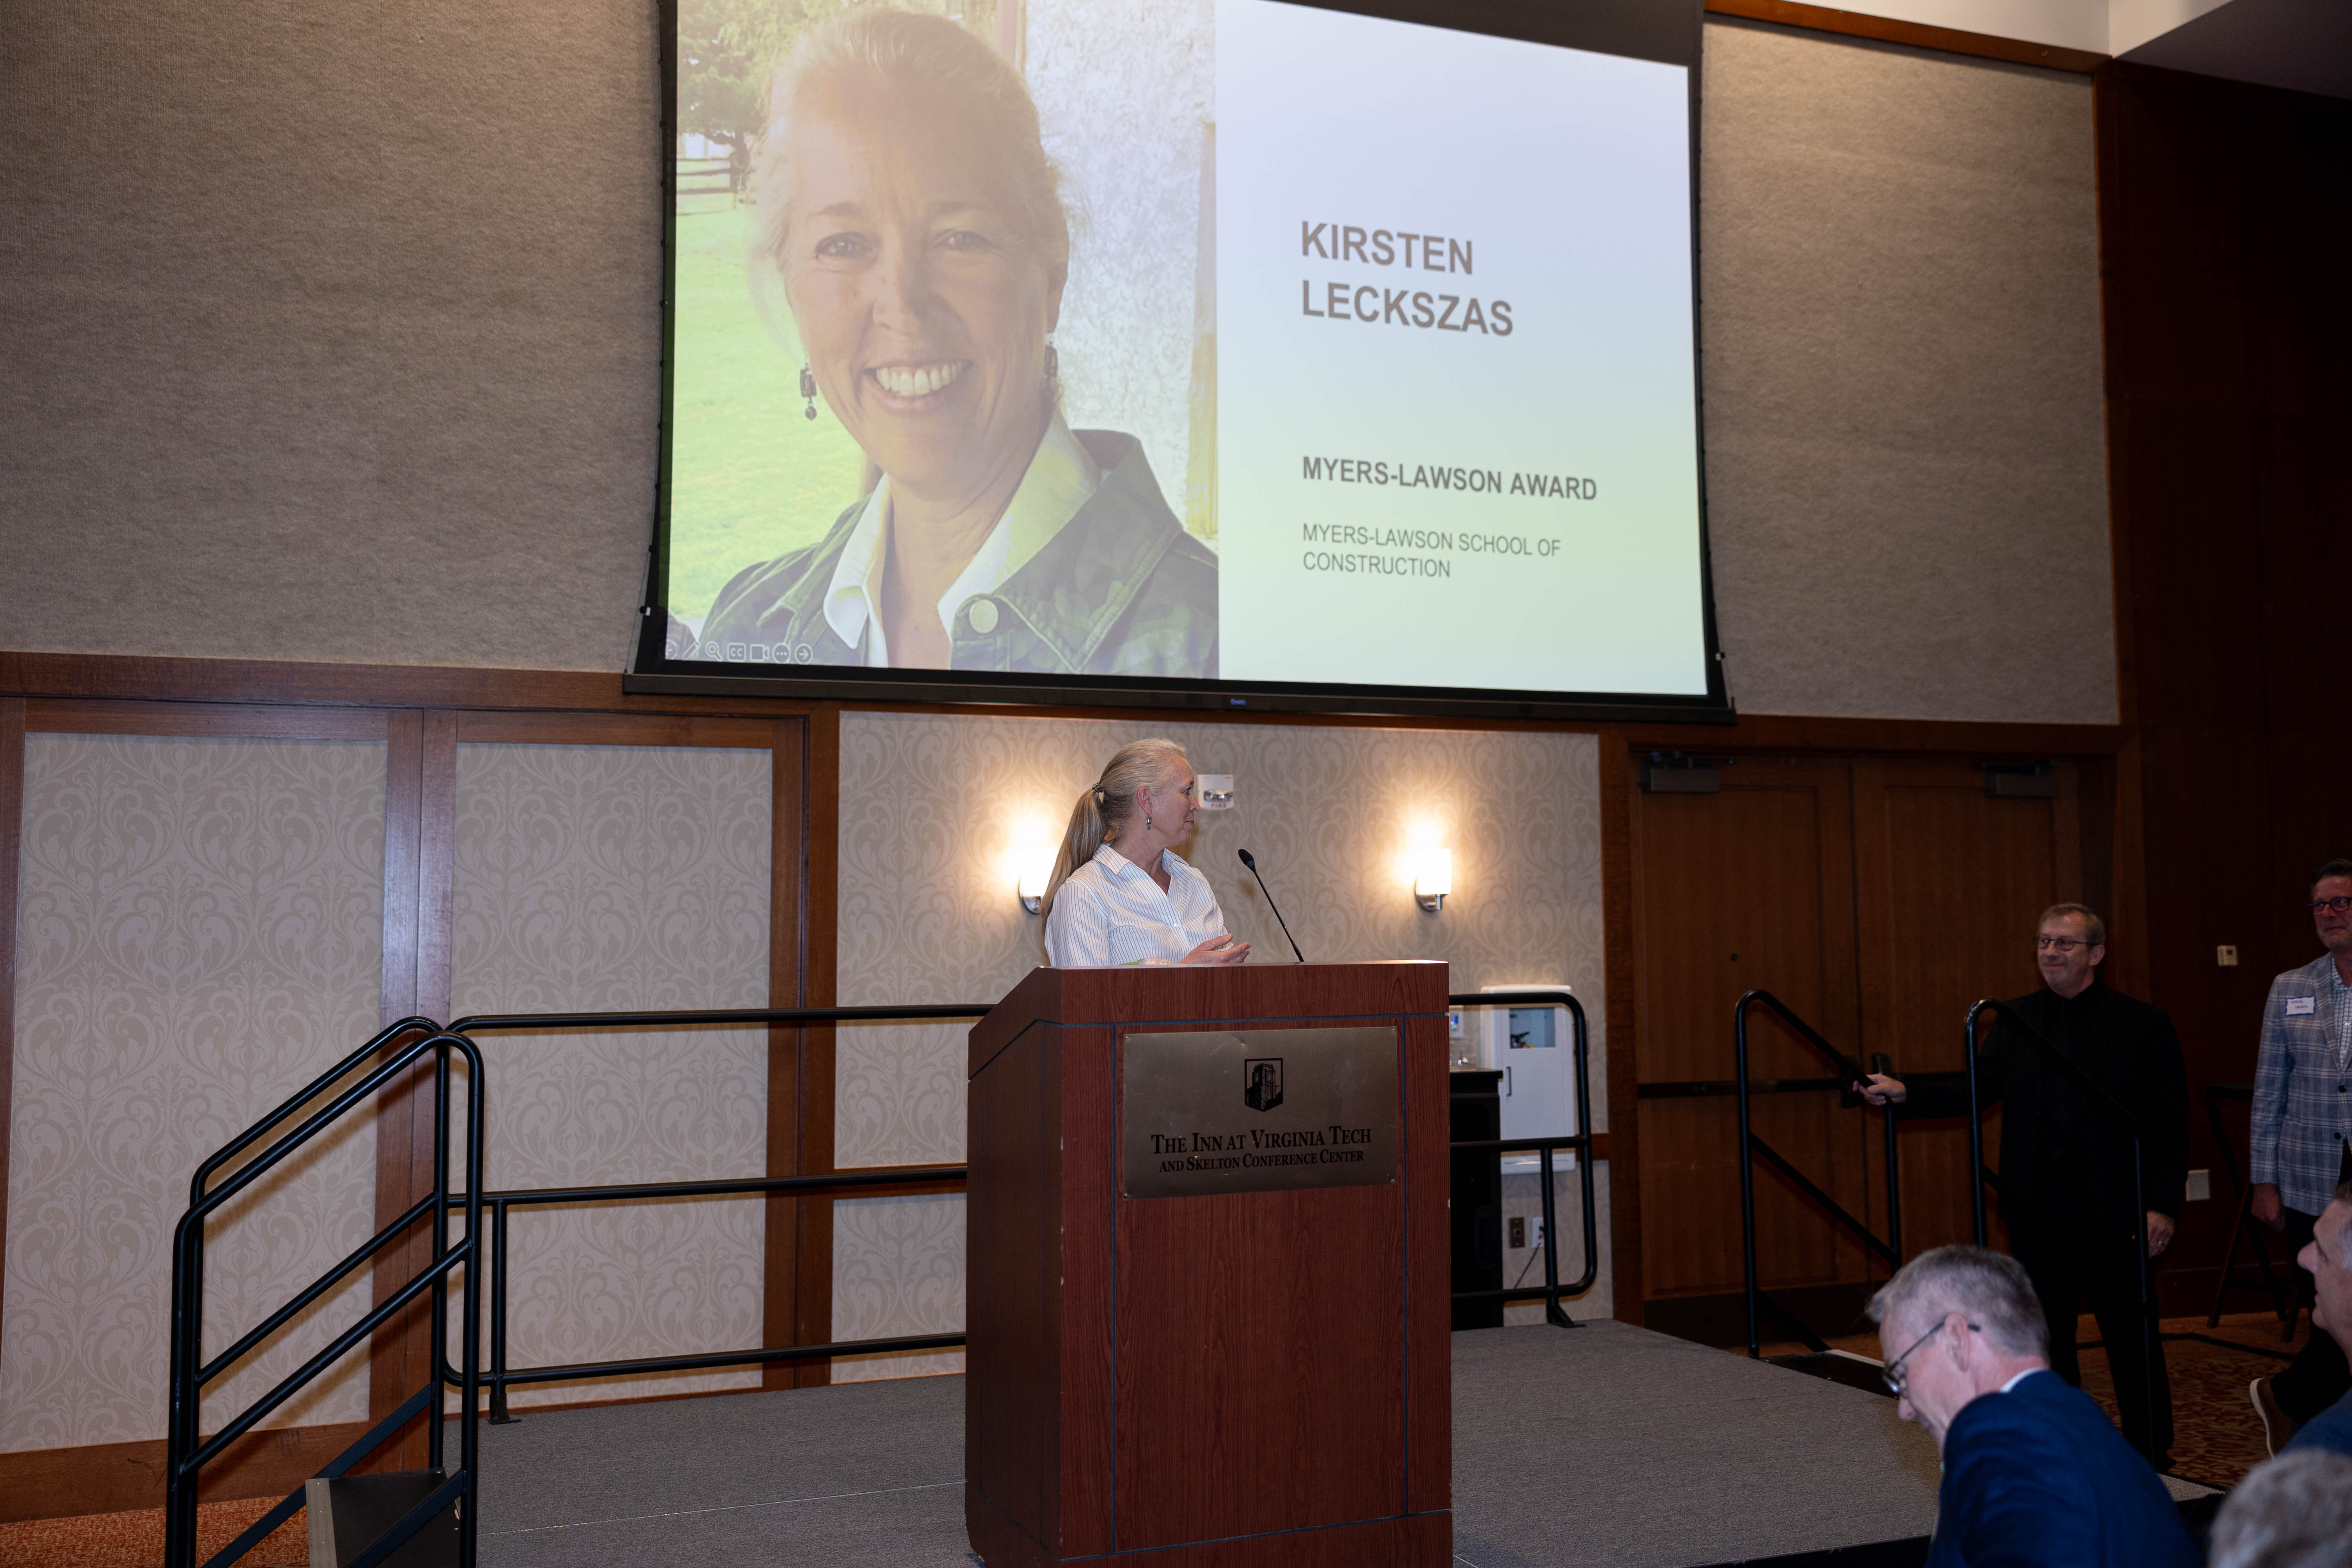 Kirsten Leckszas '88 gives acceptance speech after accepting the Myers-Lawson Award.